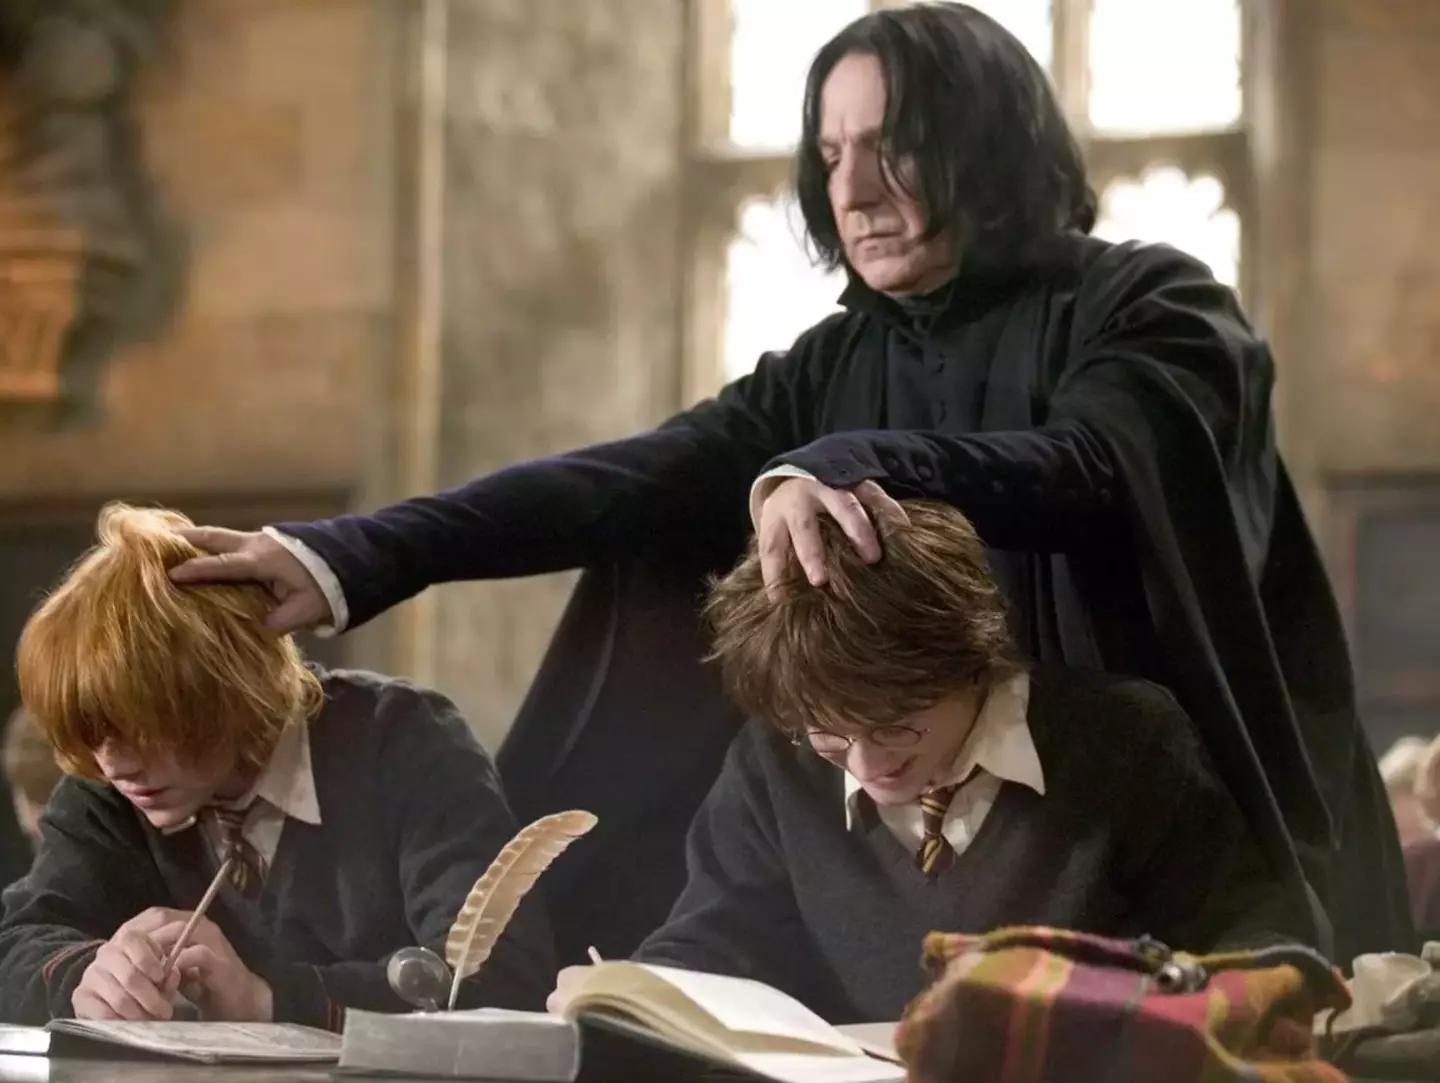 Professor Snape's first words to Harry Potter could have a very significant meaning.